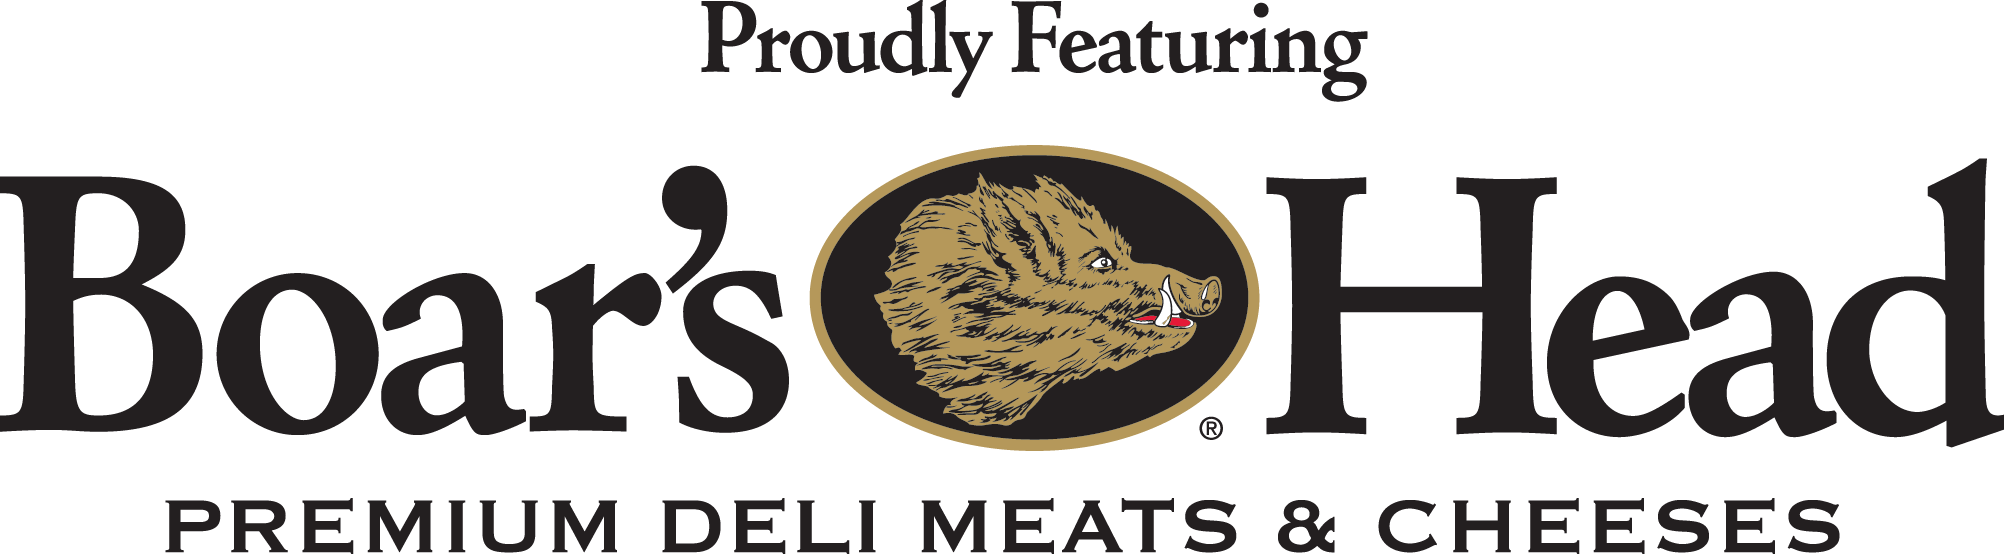 Proudly Featuring Boar's Head Premium Deli Meats and Cheeses